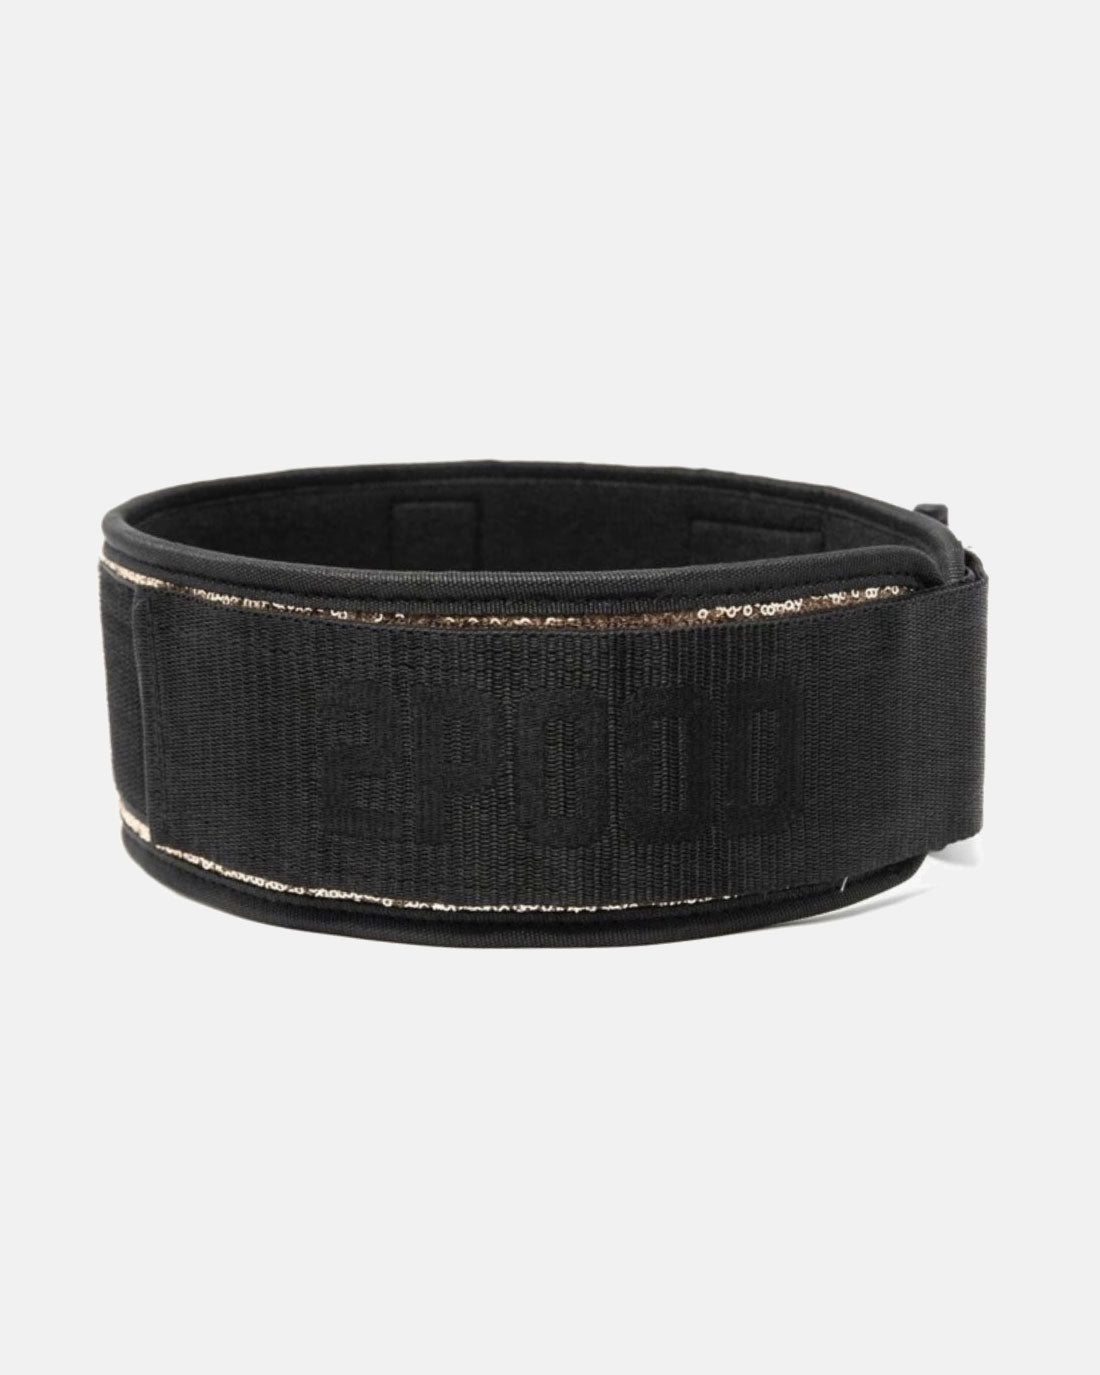 2pood weightlifting belt classy bling